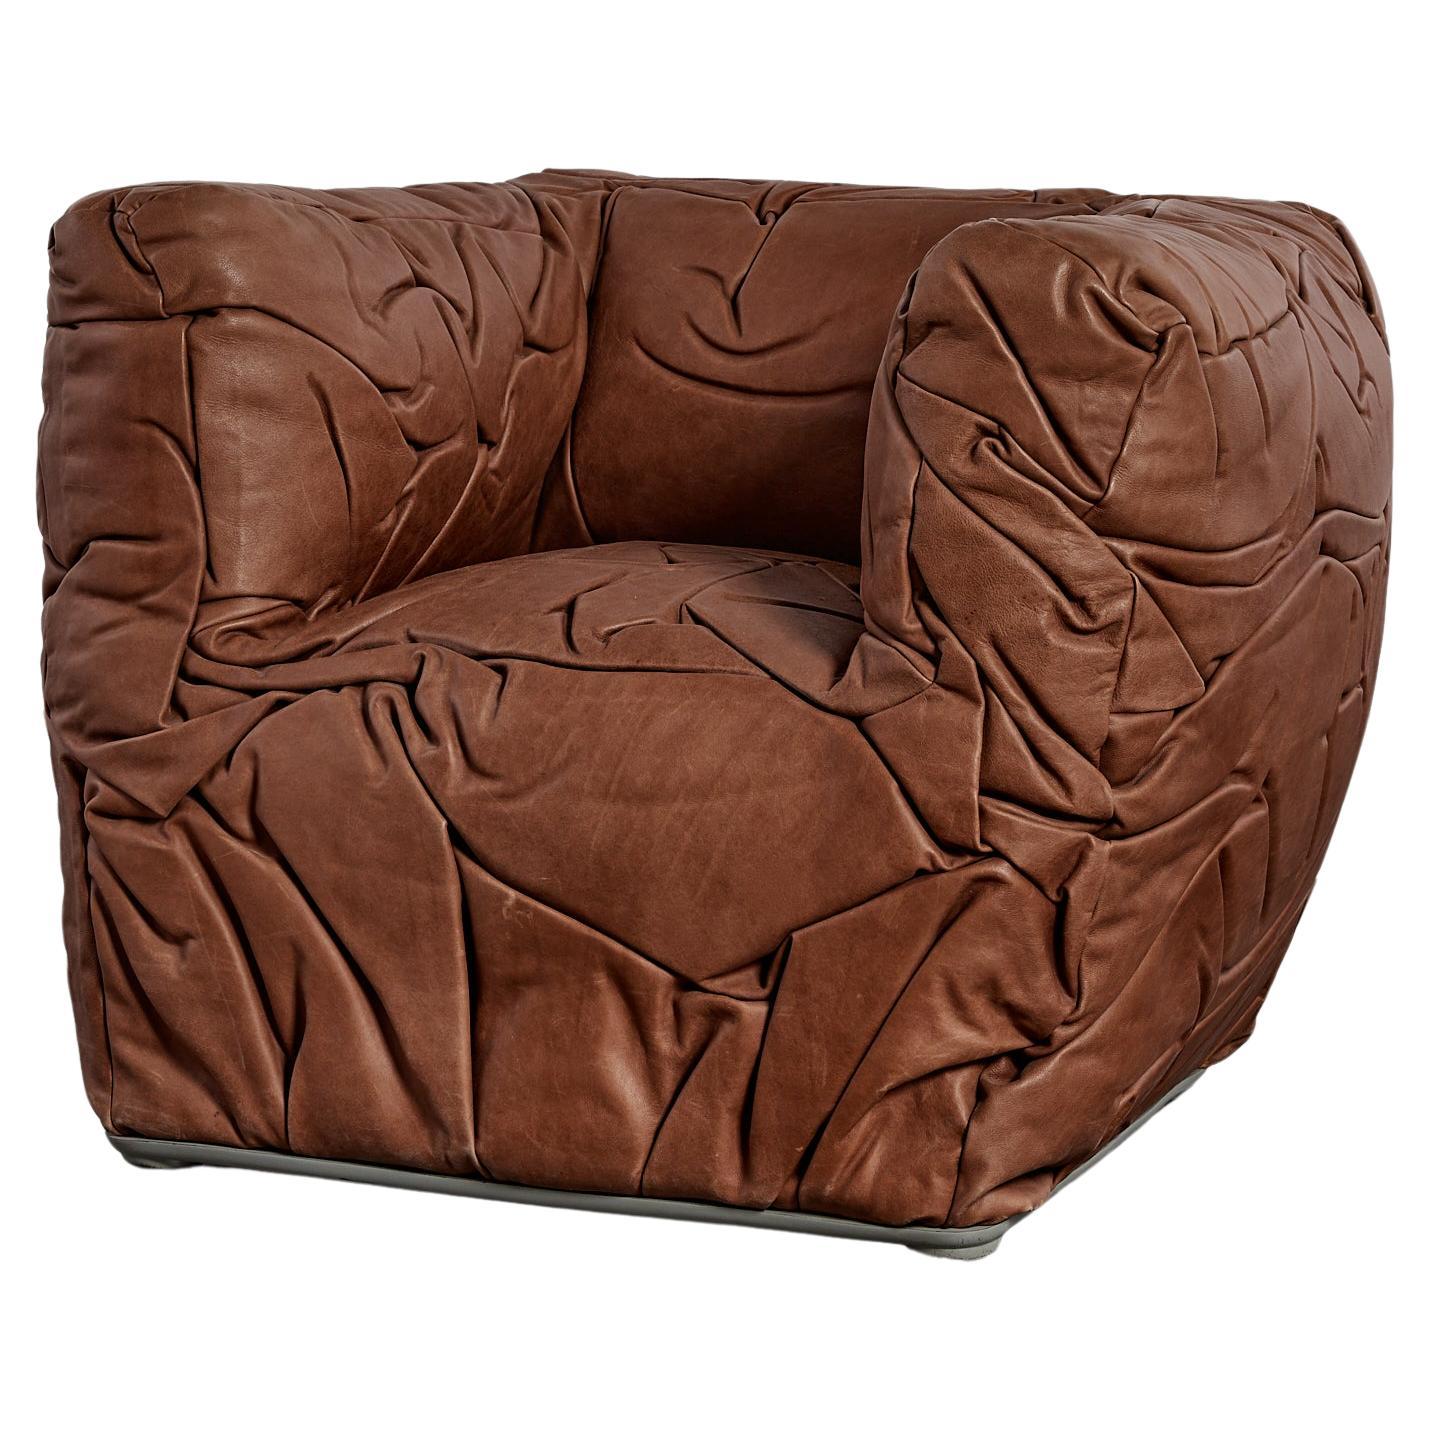 Sculptural brown leather Sponge armchair by Peter Traag for Edra